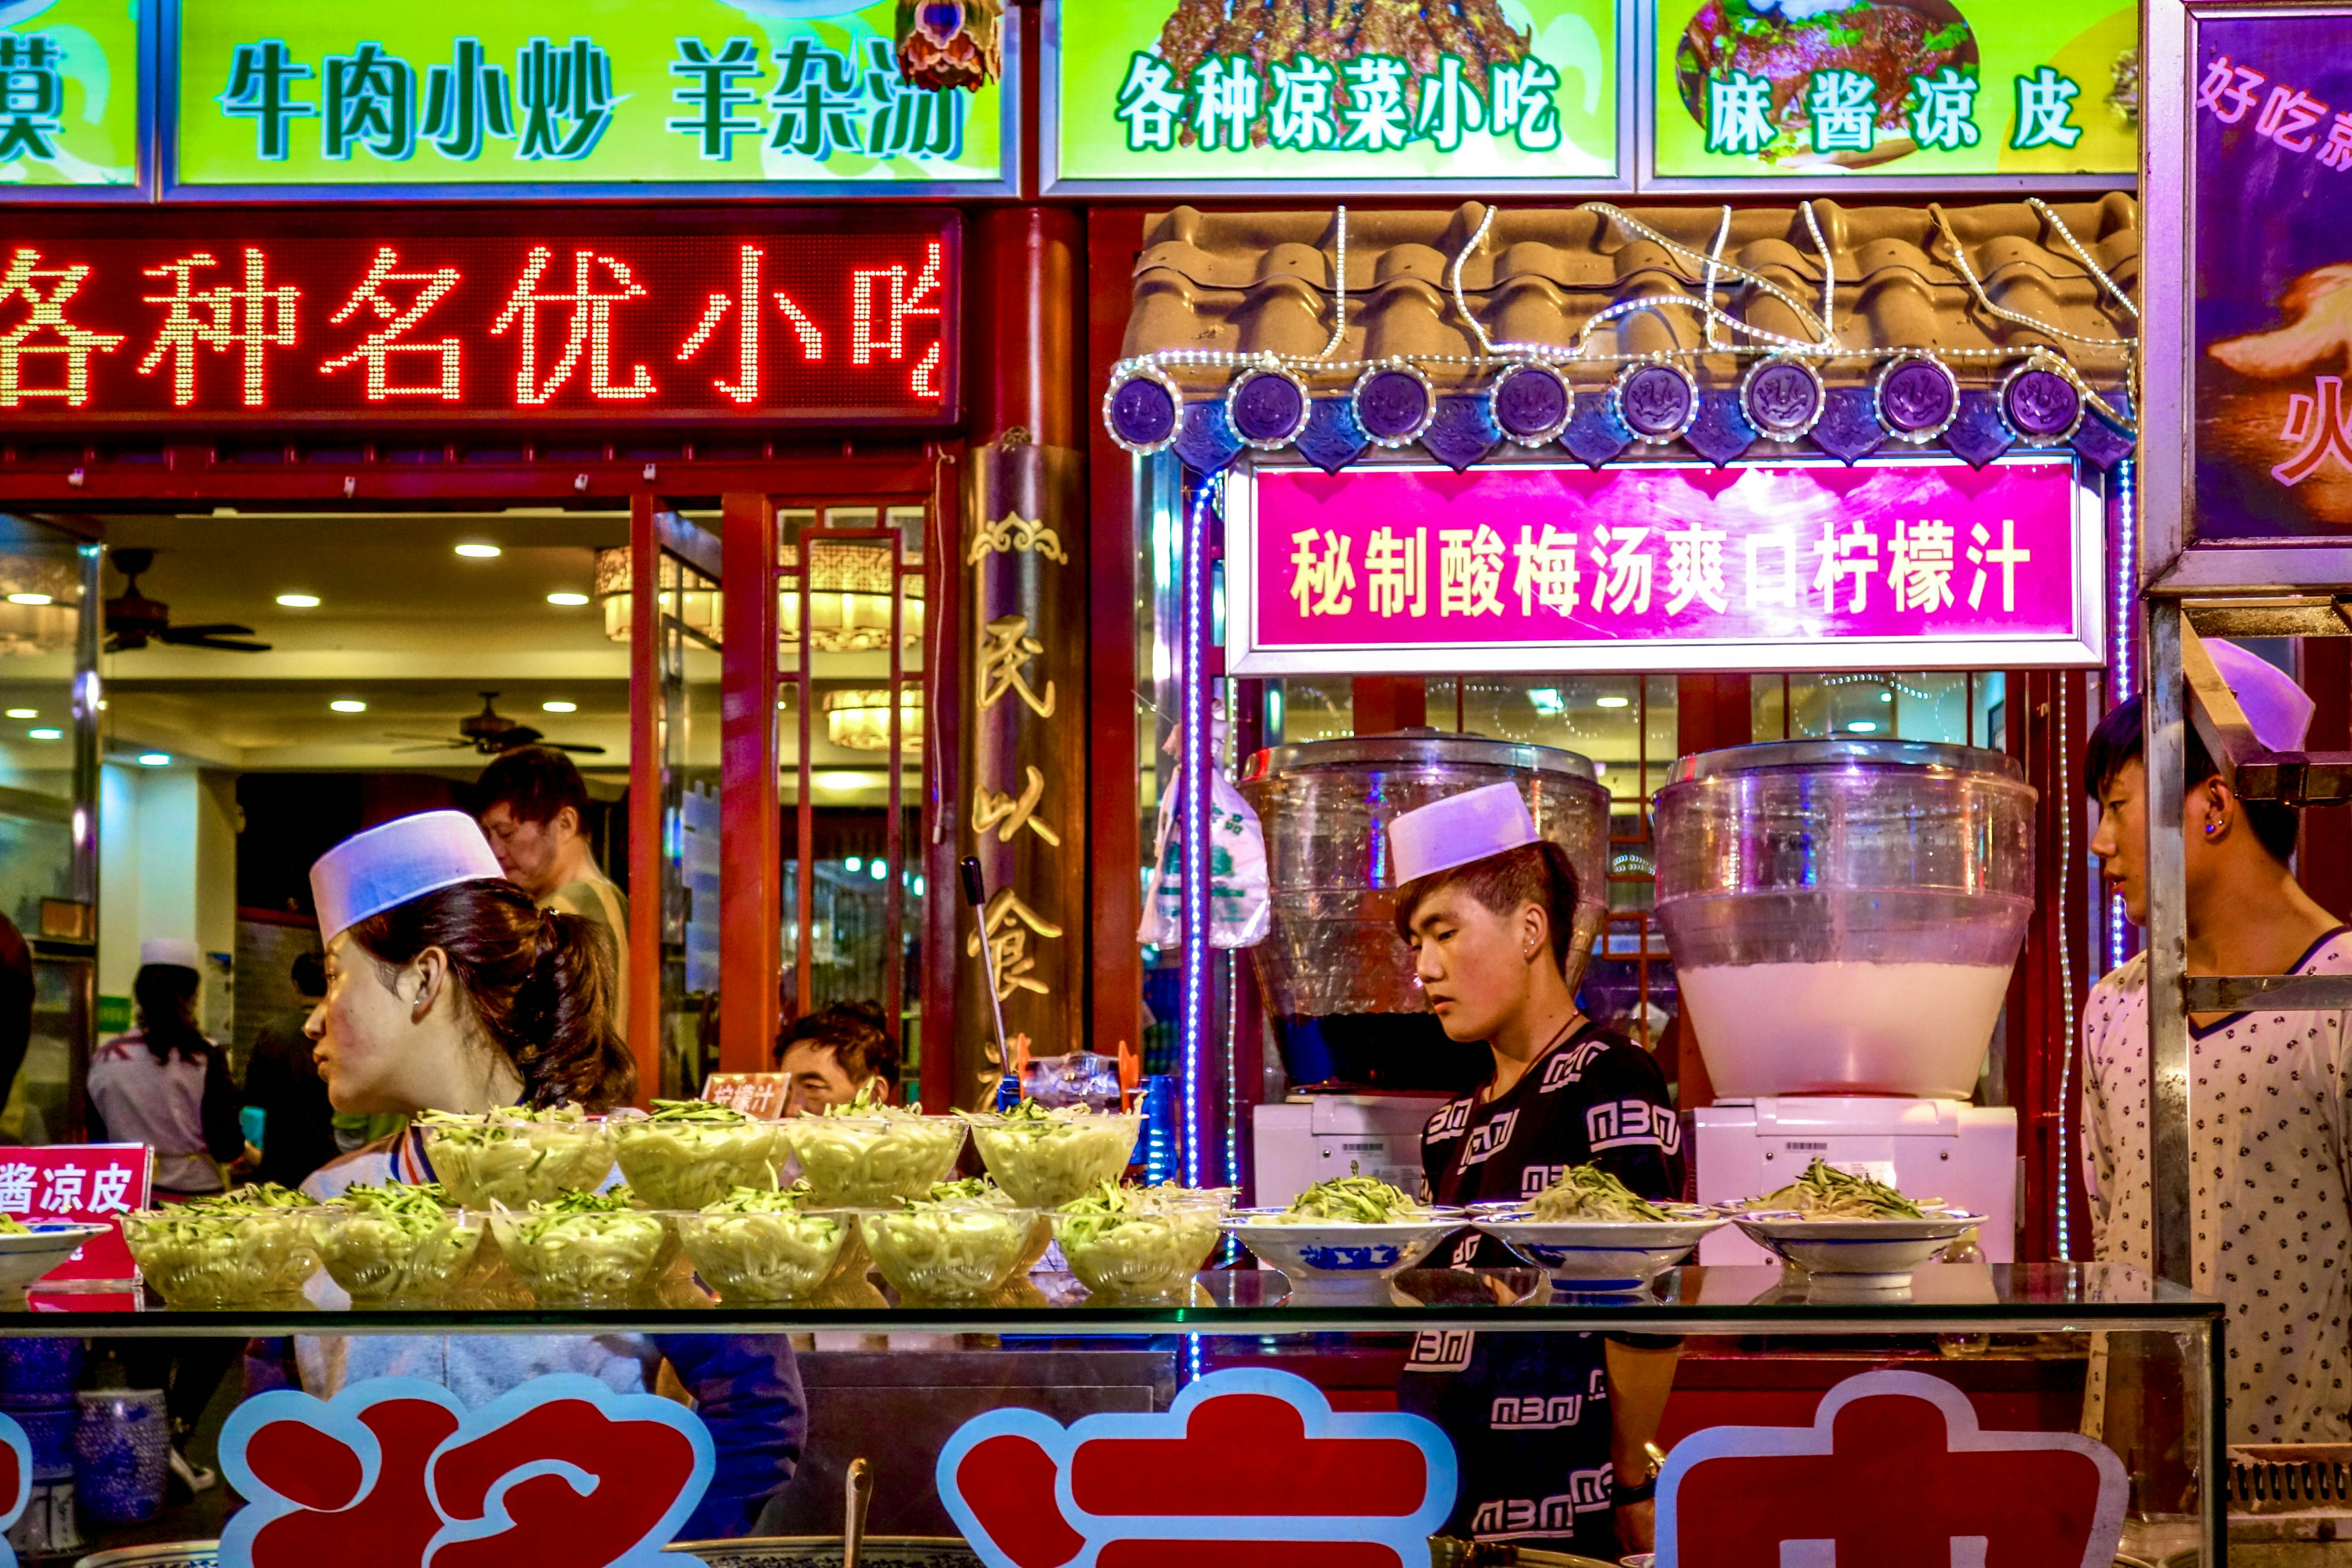 Xi'an, China - April 2015: Bowls of noodles for sale among bright neon signs at the Xian Muslim Street Market in Shaanxi province, China